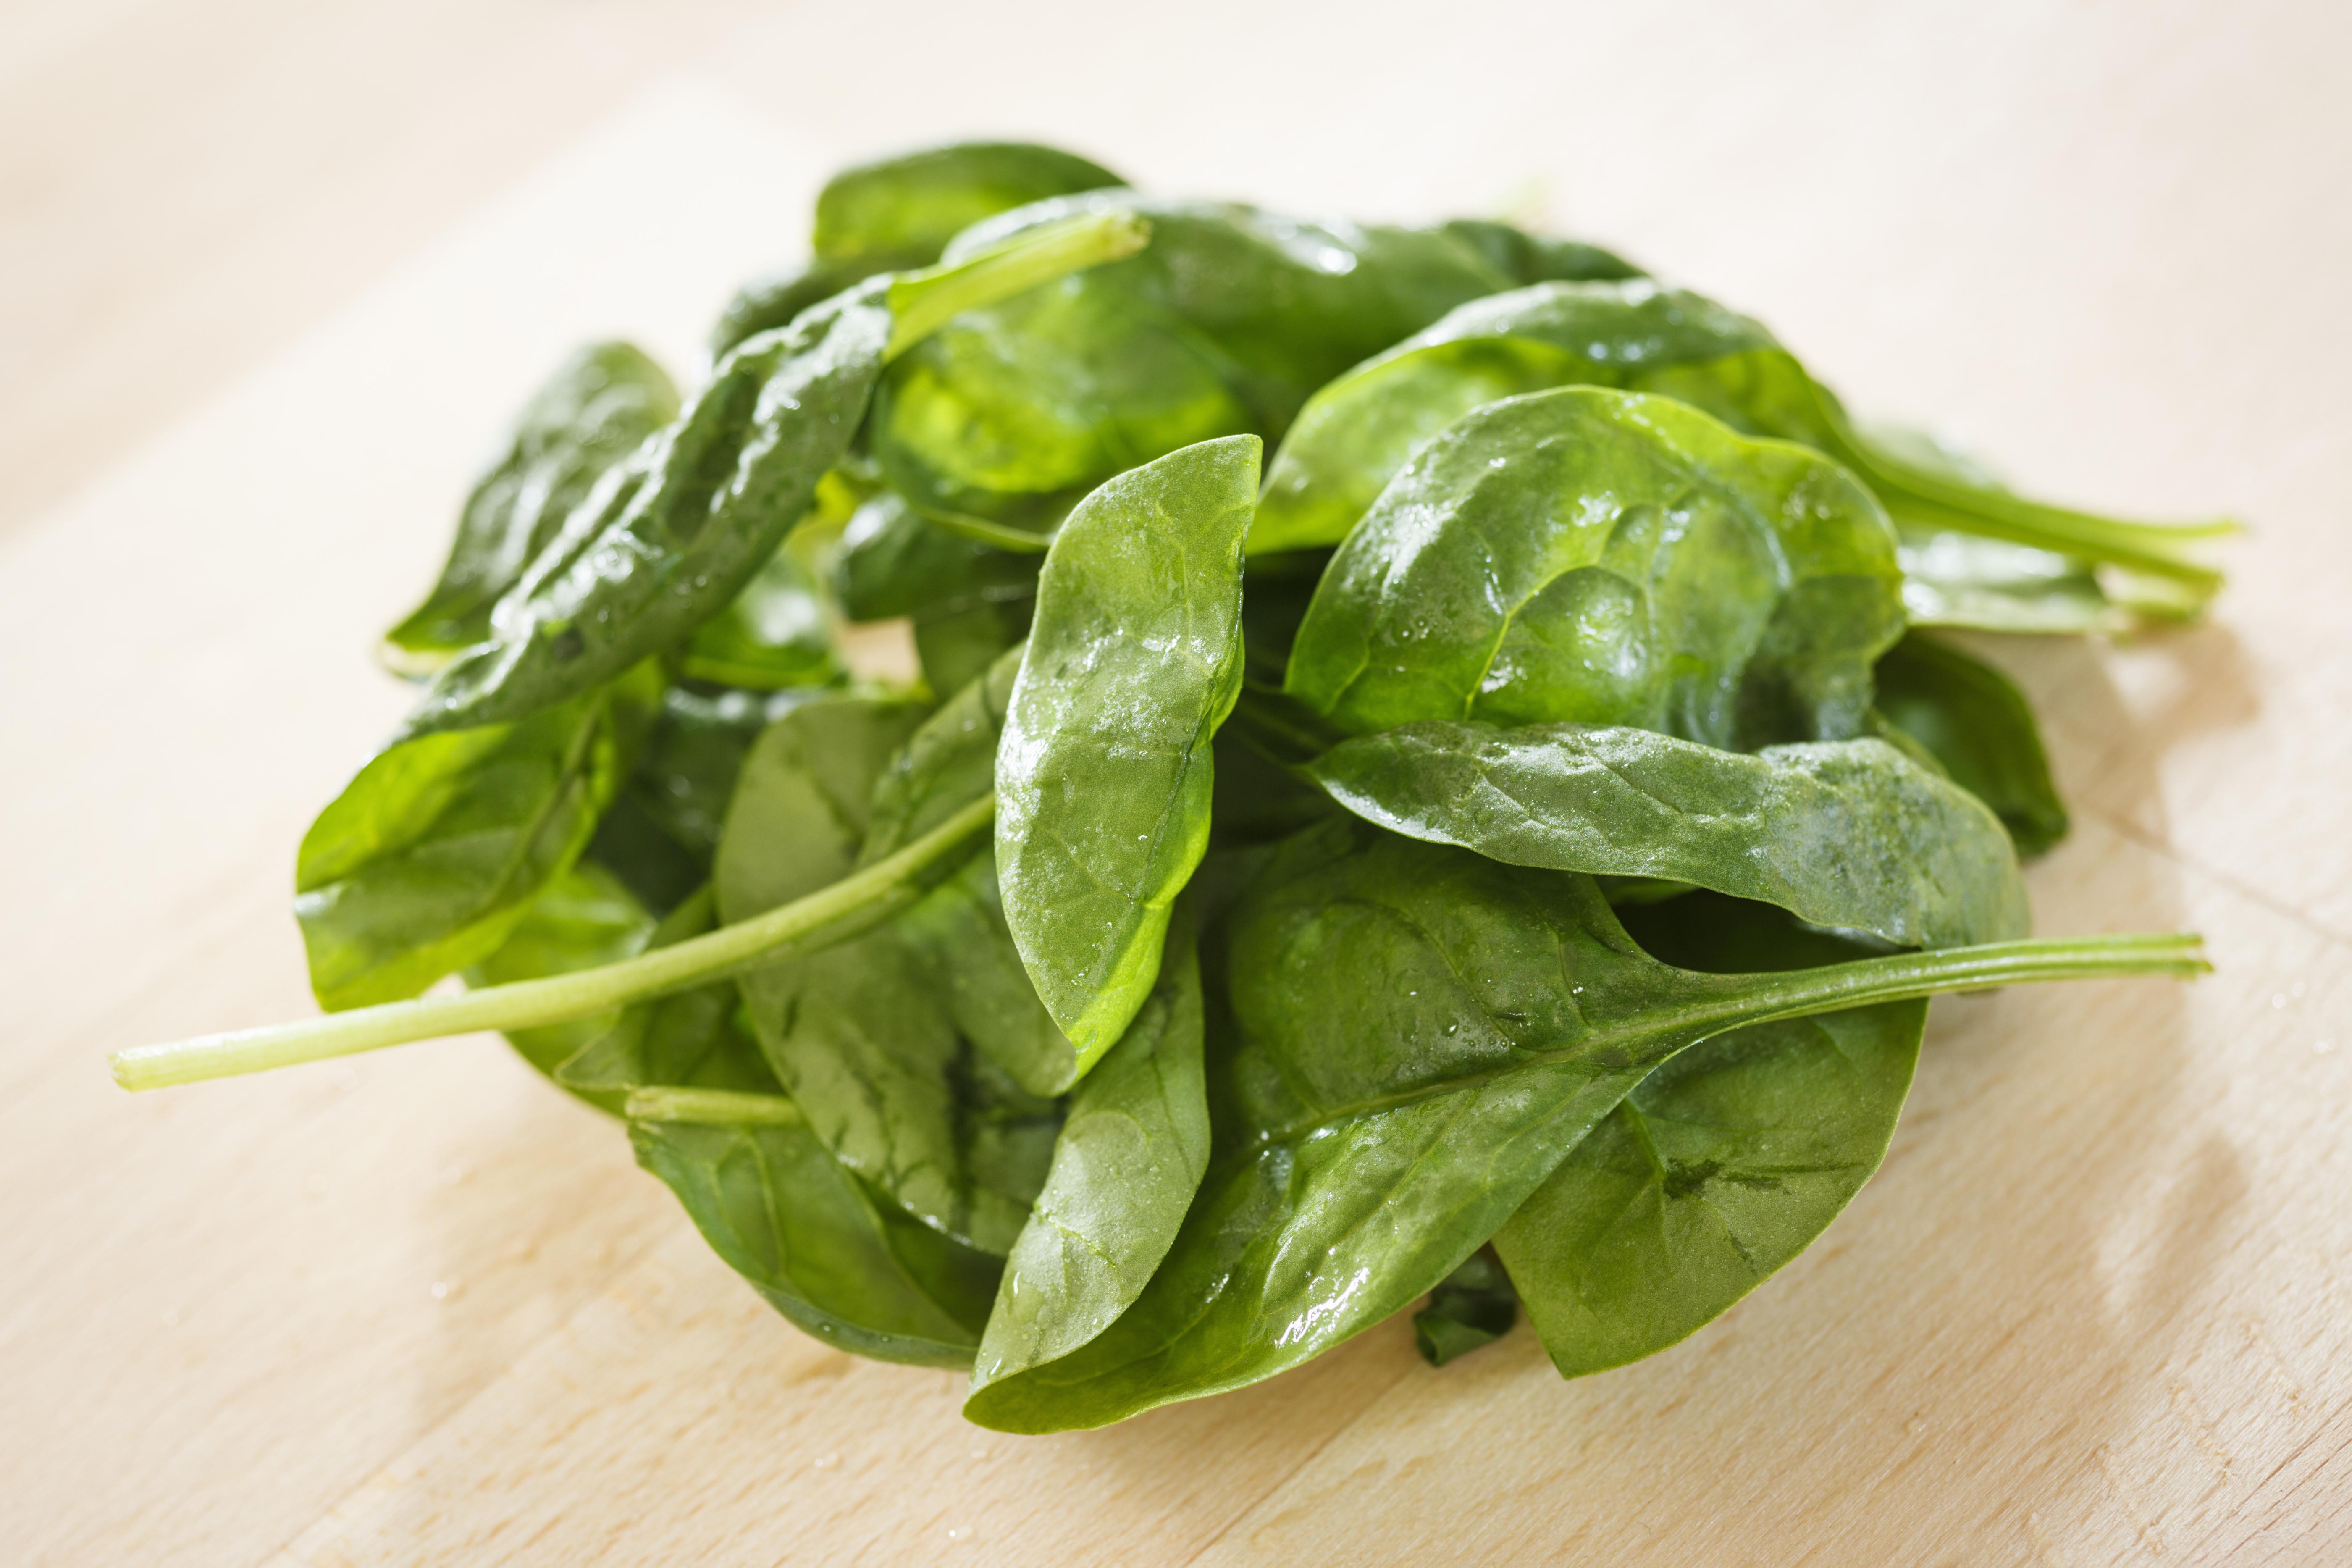 Bunch of fresh spinach on a wooden table